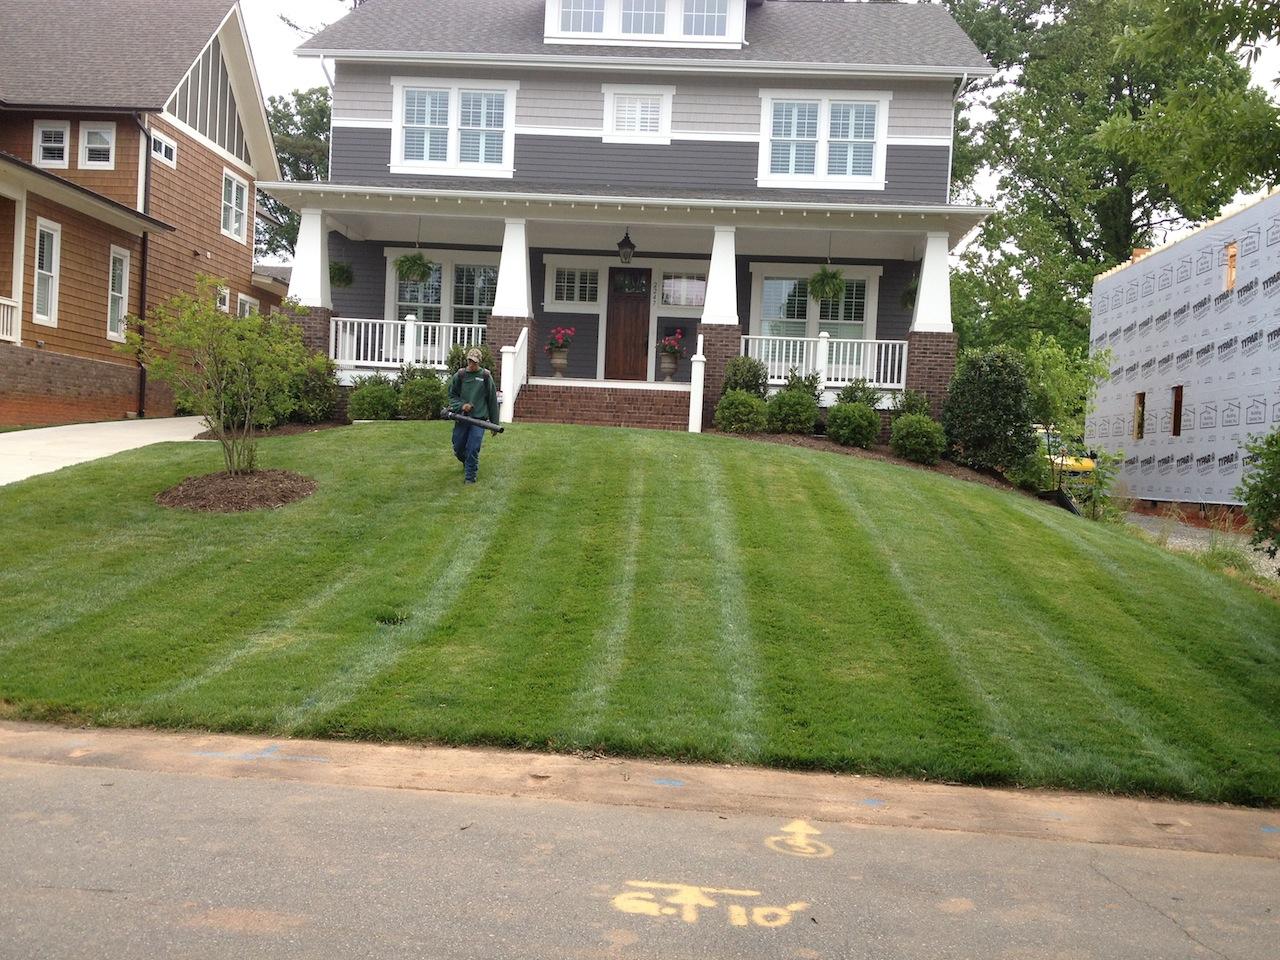 Keep Your Lawn Healthy With This Top Charlotte, NC Landscape Maintenance Service